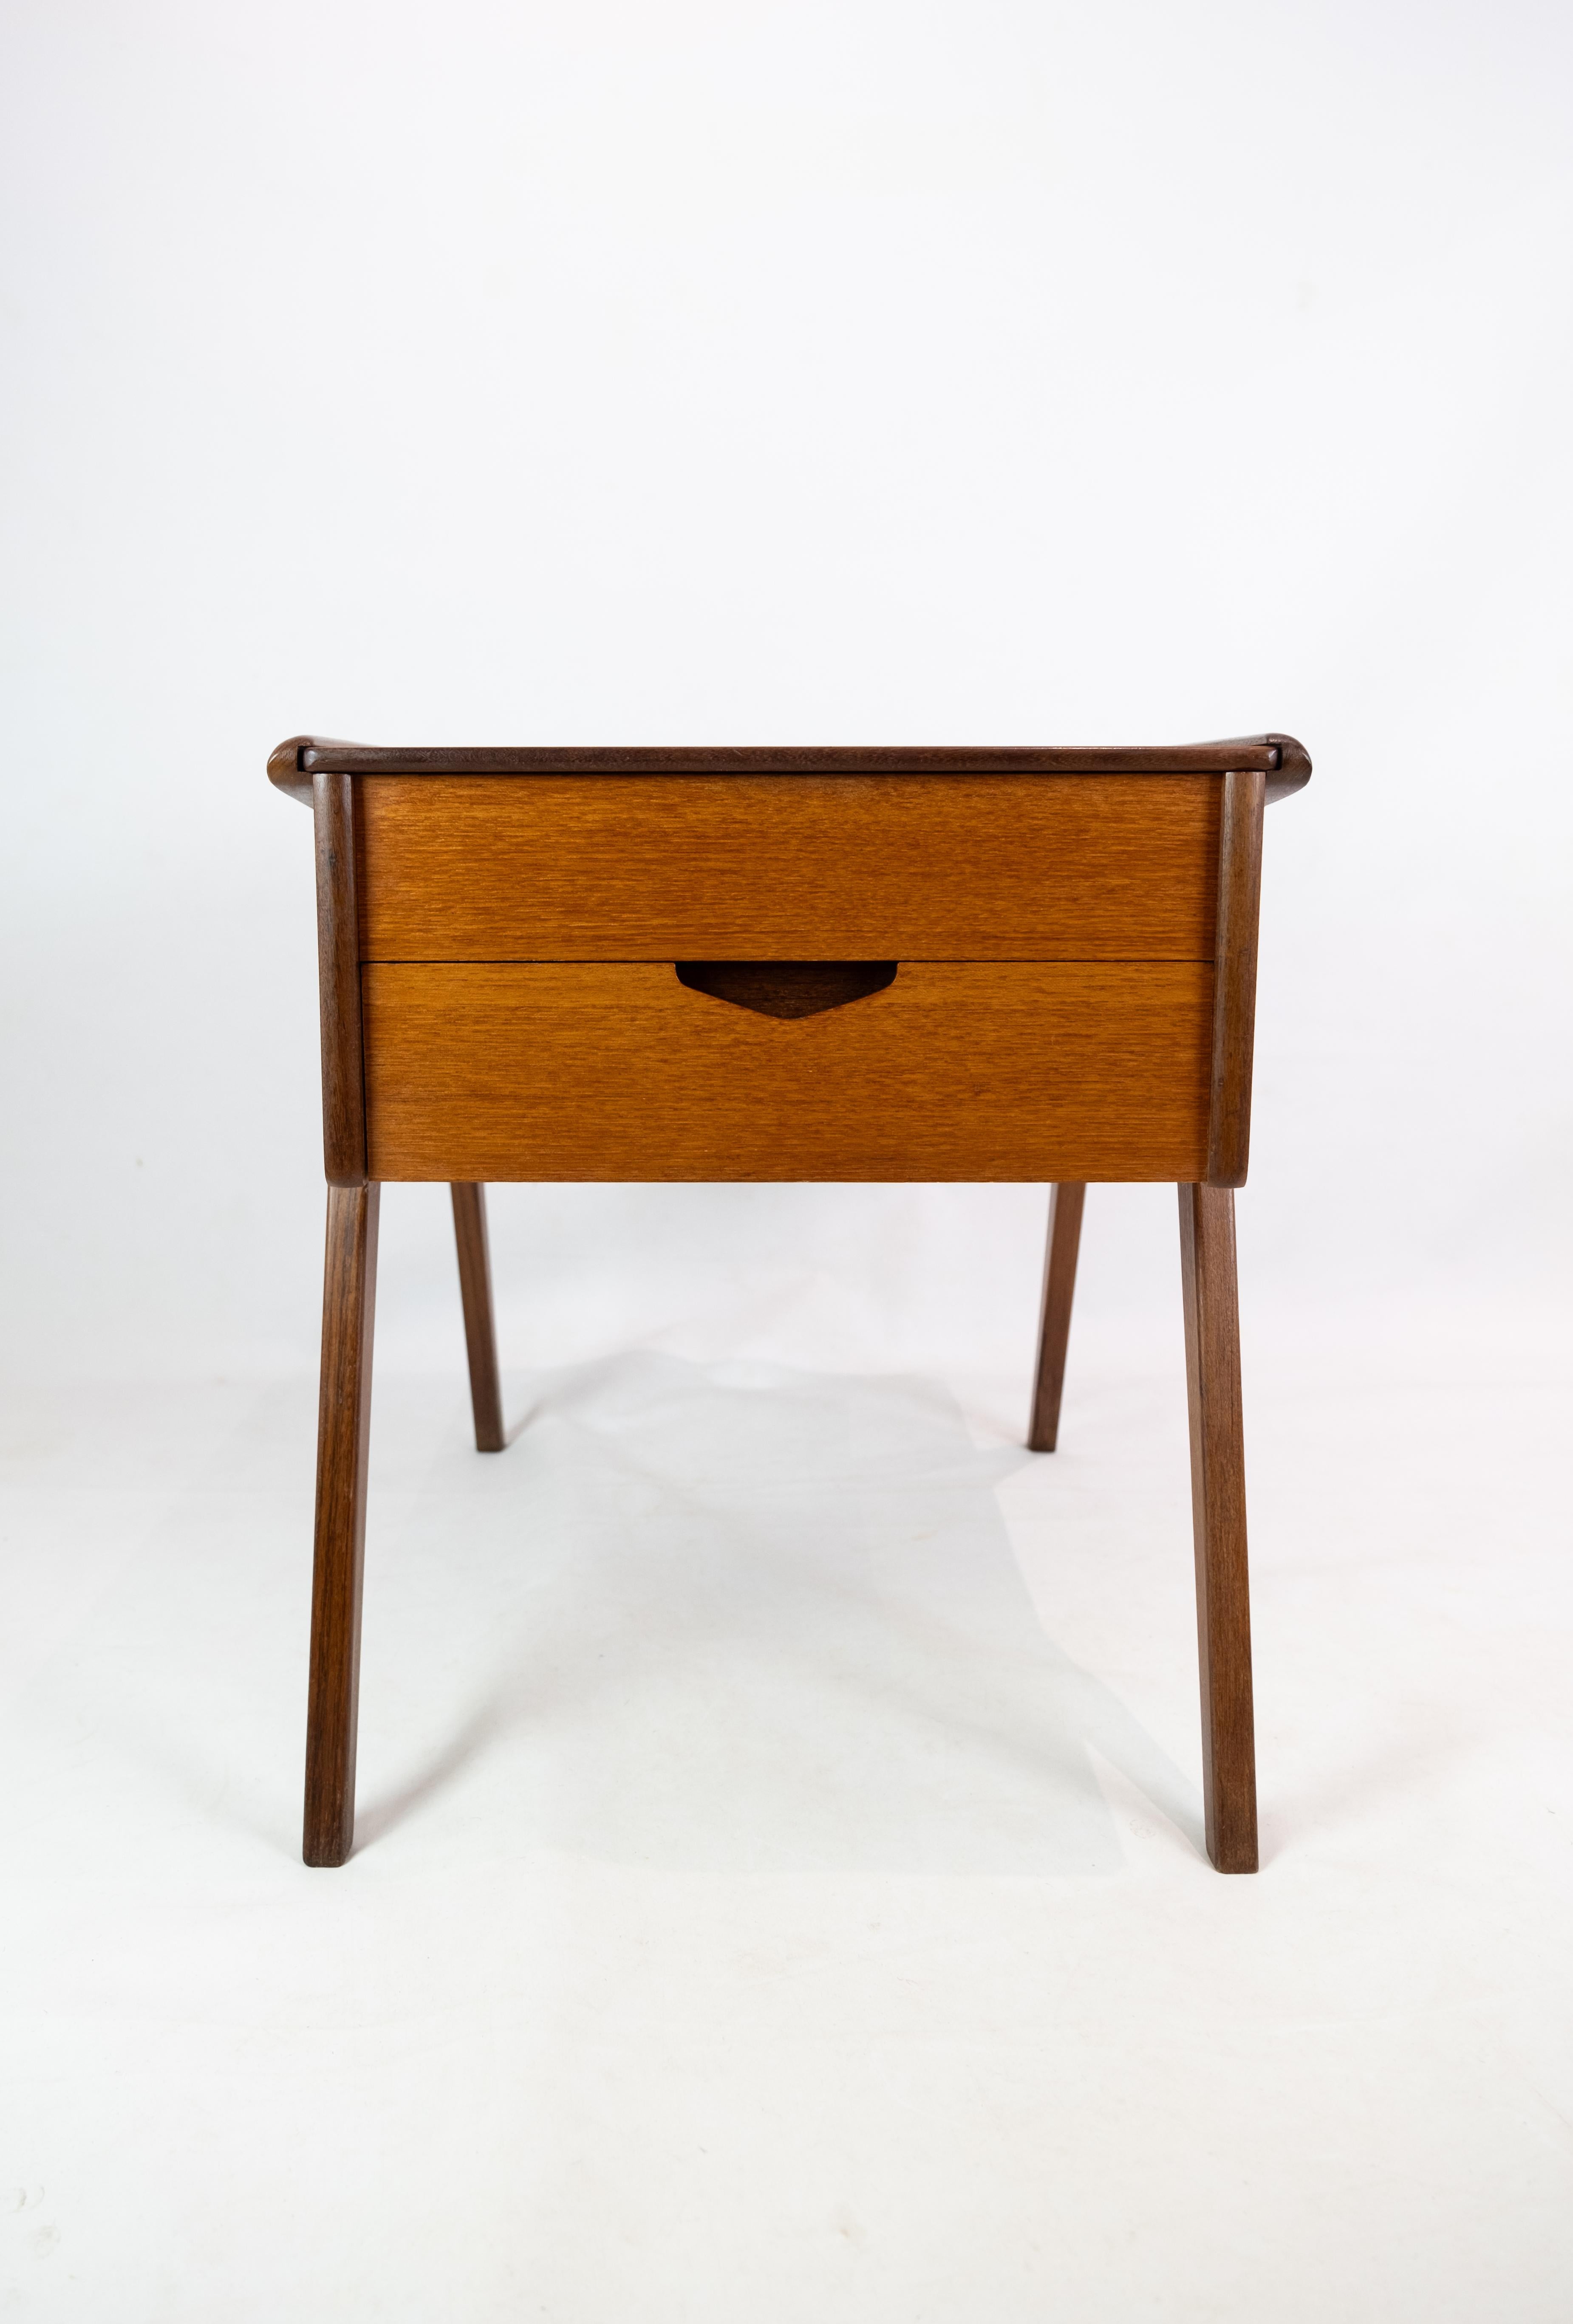 Sewing Table in Teak Wood of Danish Design From The 1960's For Sale 1